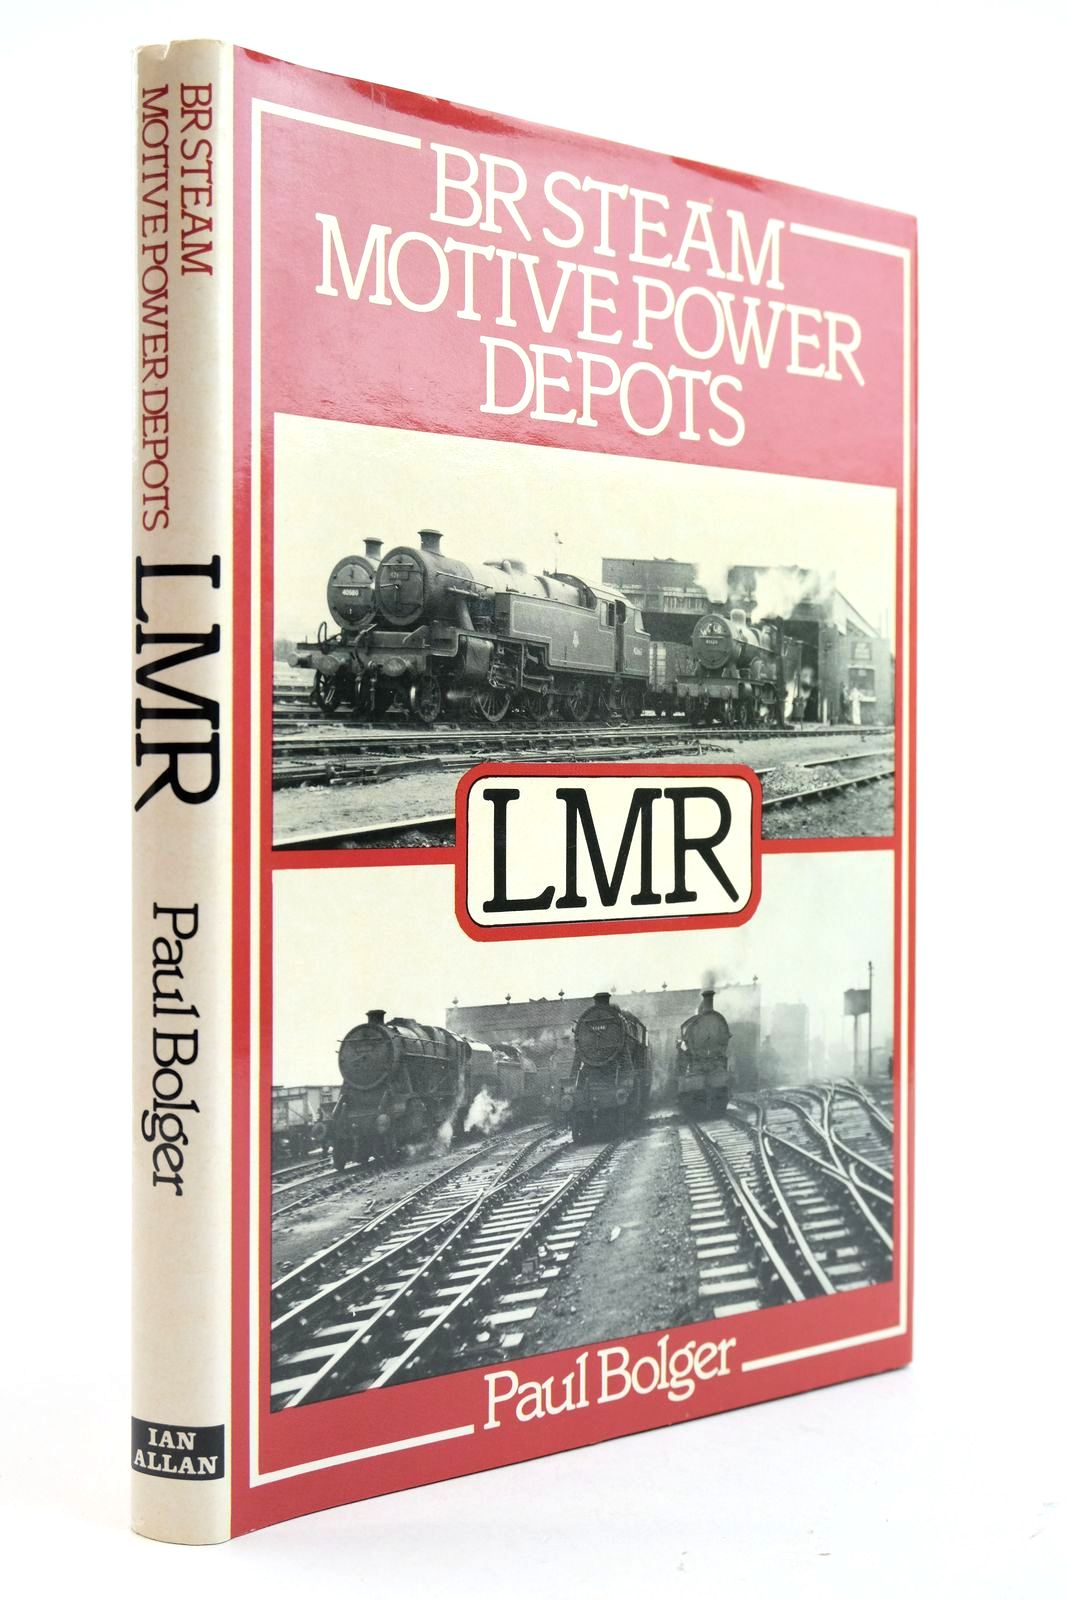 Photo of BR STEAM MOTIVE POWER DEPOTS LMR written by Bolger, Paul published by Ian Allan Ltd. (STOCK CODE: 2133029)  for sale by Stella & Rose's Books